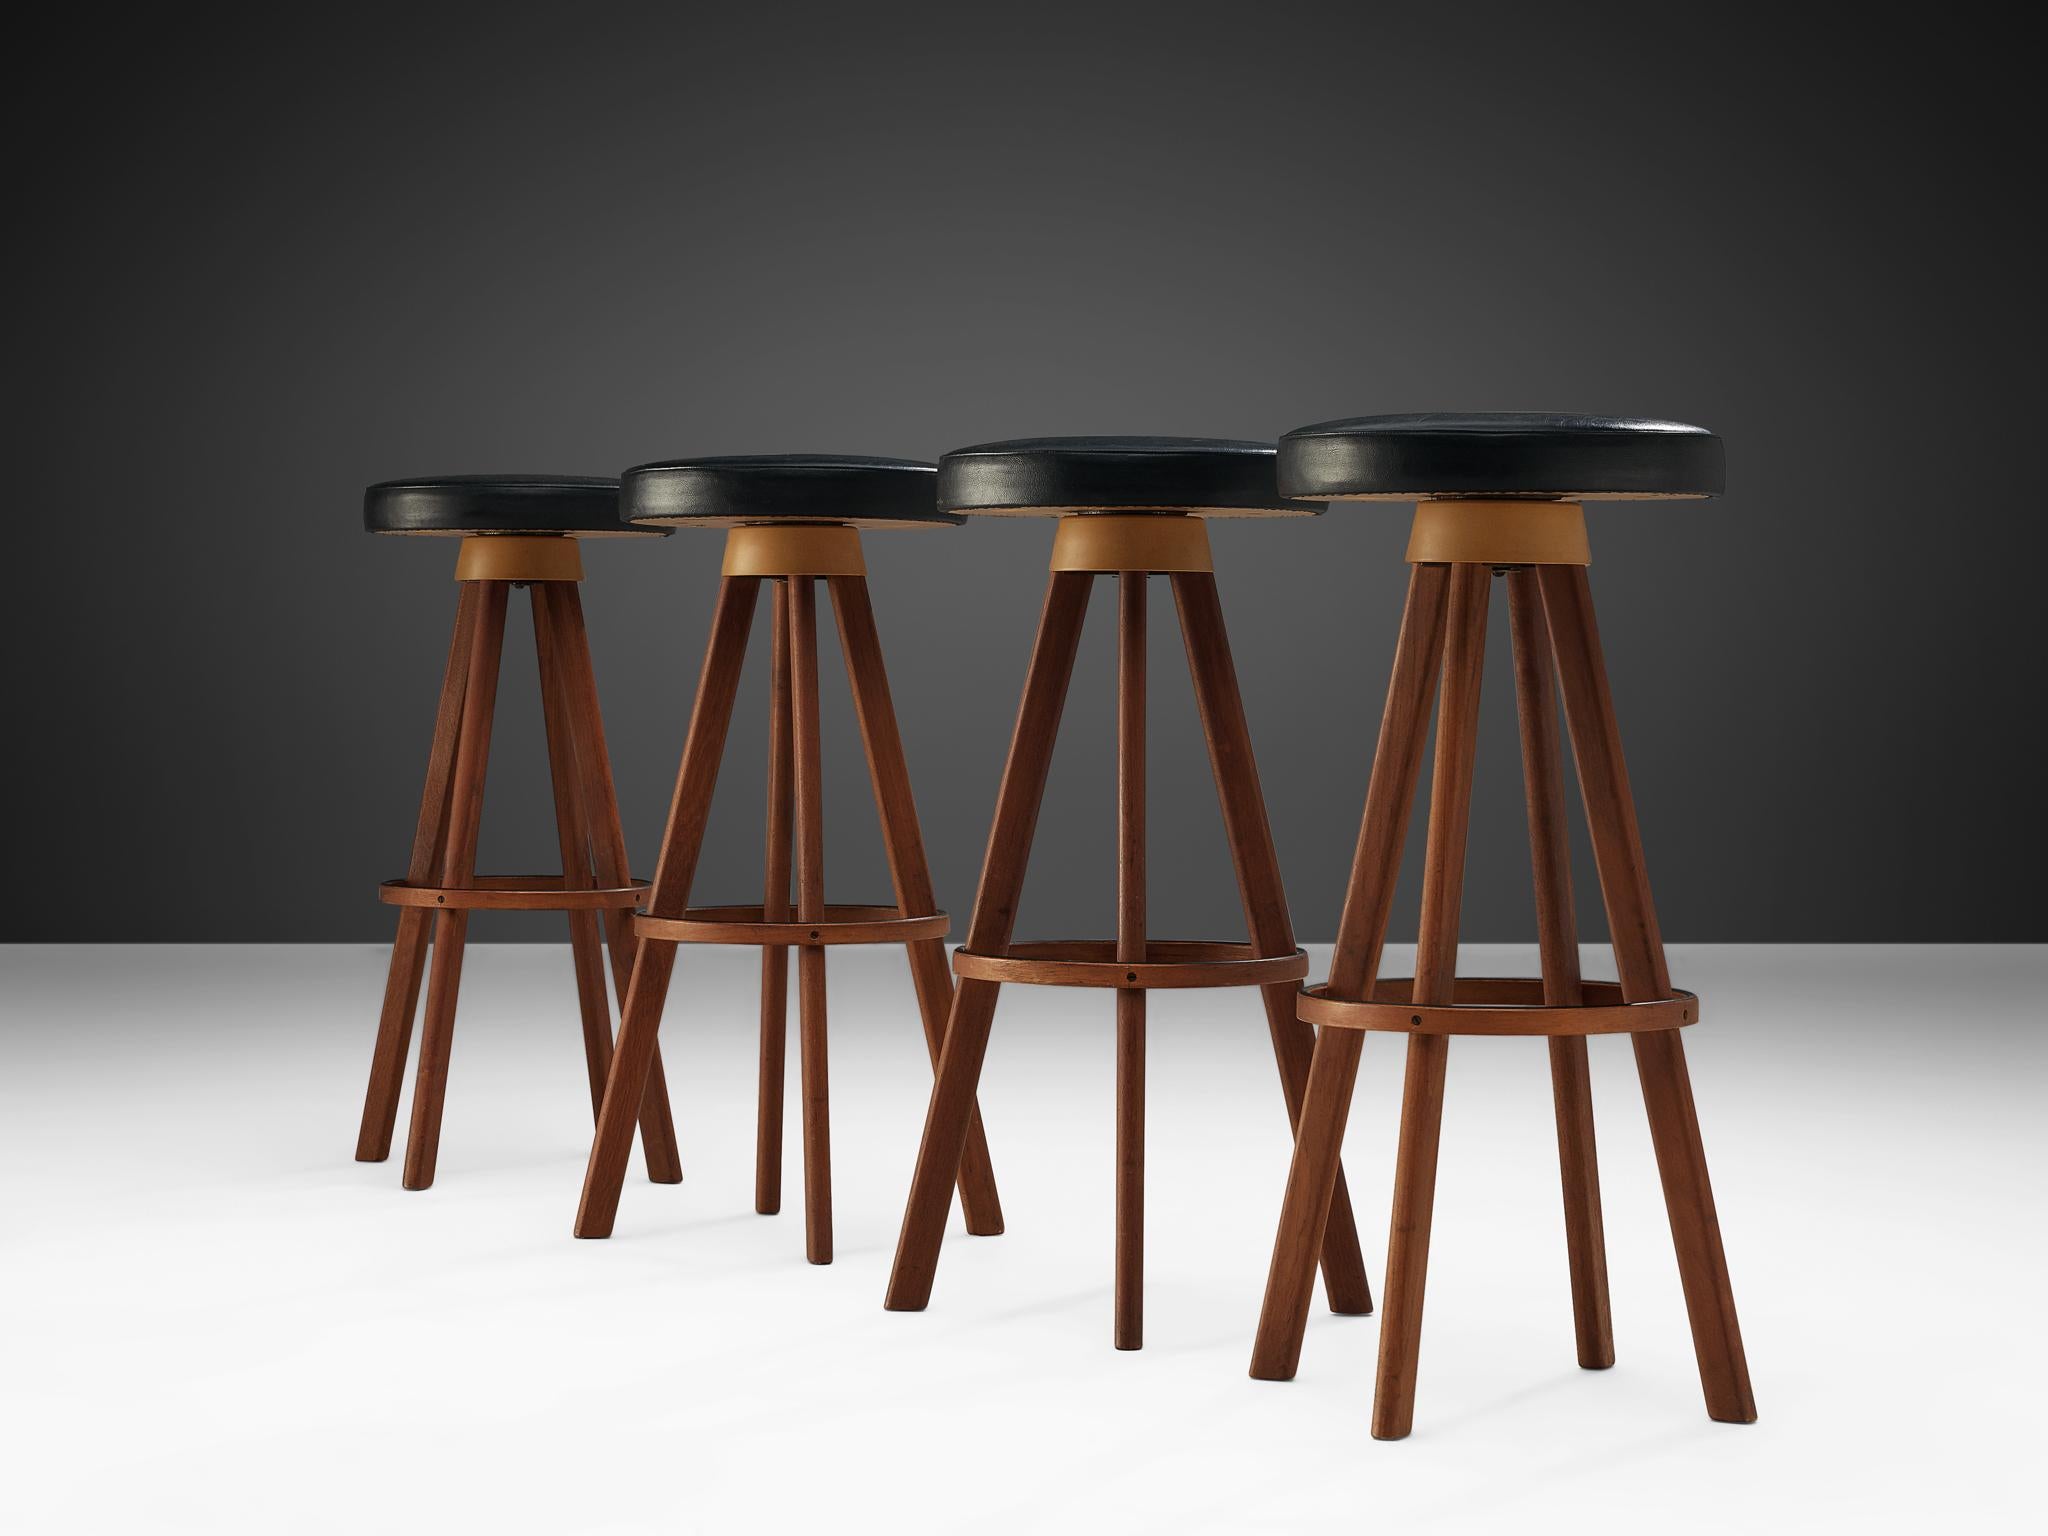 Bar stools manufactured by Frem Røjle, teak and faux leather, Denmark, 1960s.

These bar stools are very solid and modest in their appearance. The frame of the stools, including the ring that connects the four legs is executed in teak. The round